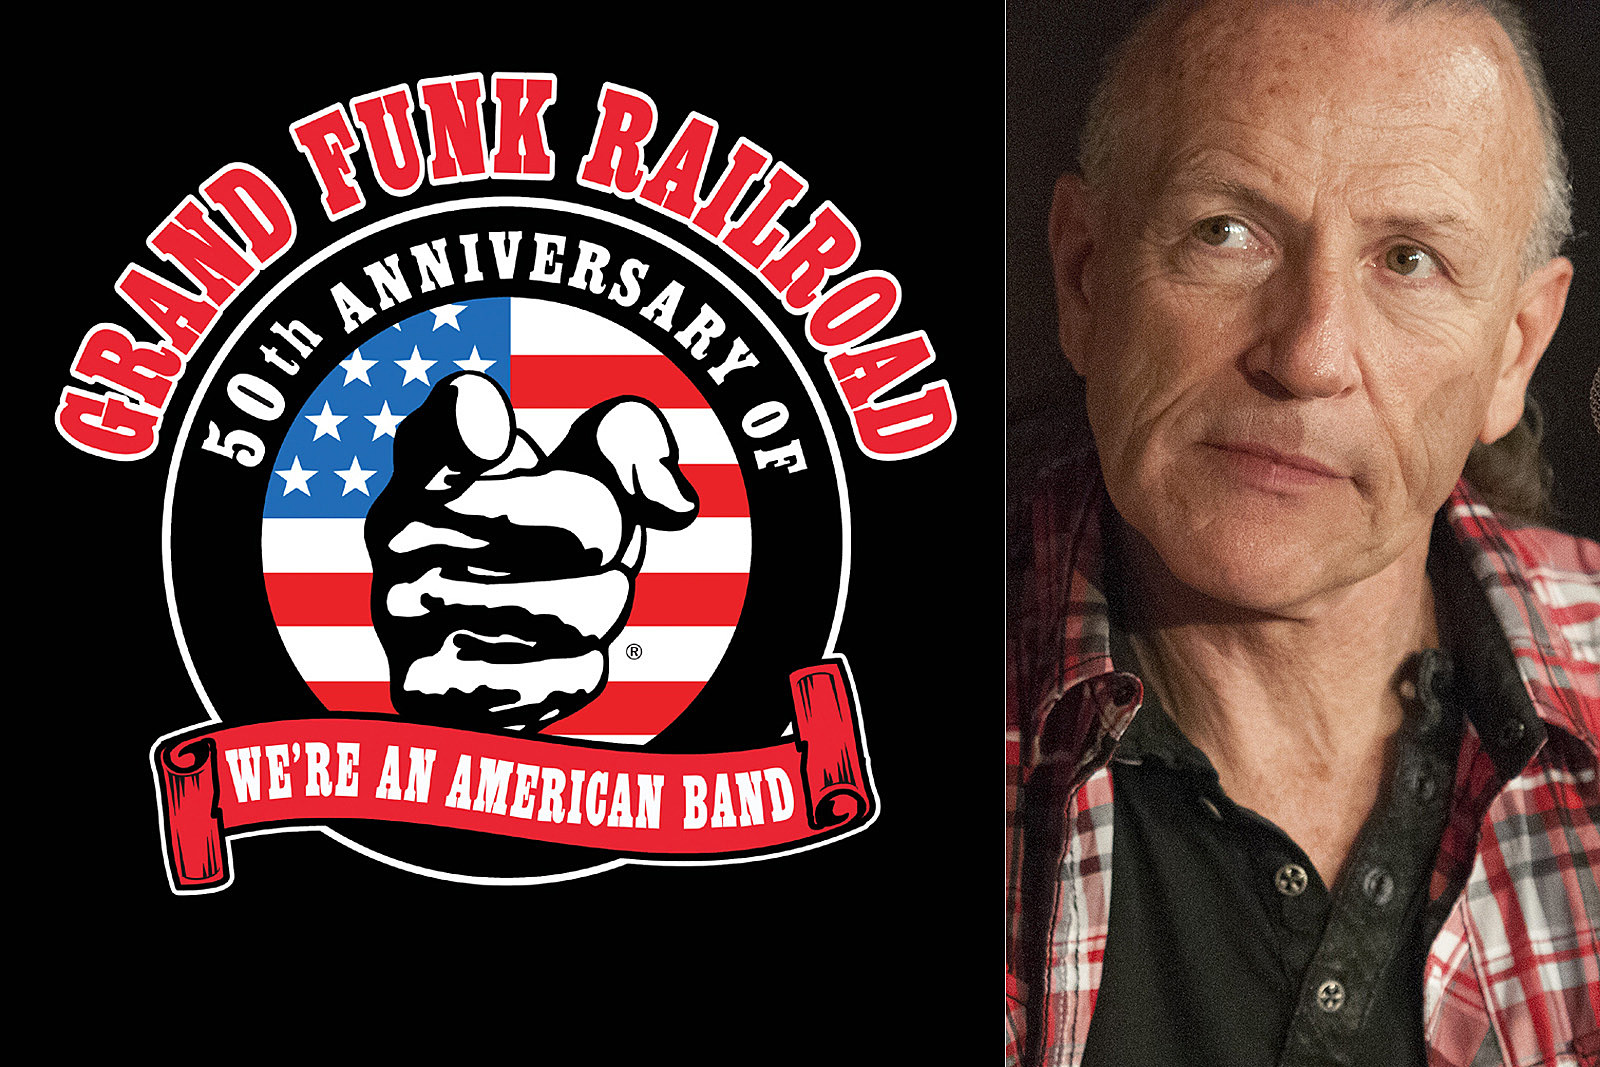 Grand Funk Railroad's Mark Farner Recovering From Pacemaker Operation